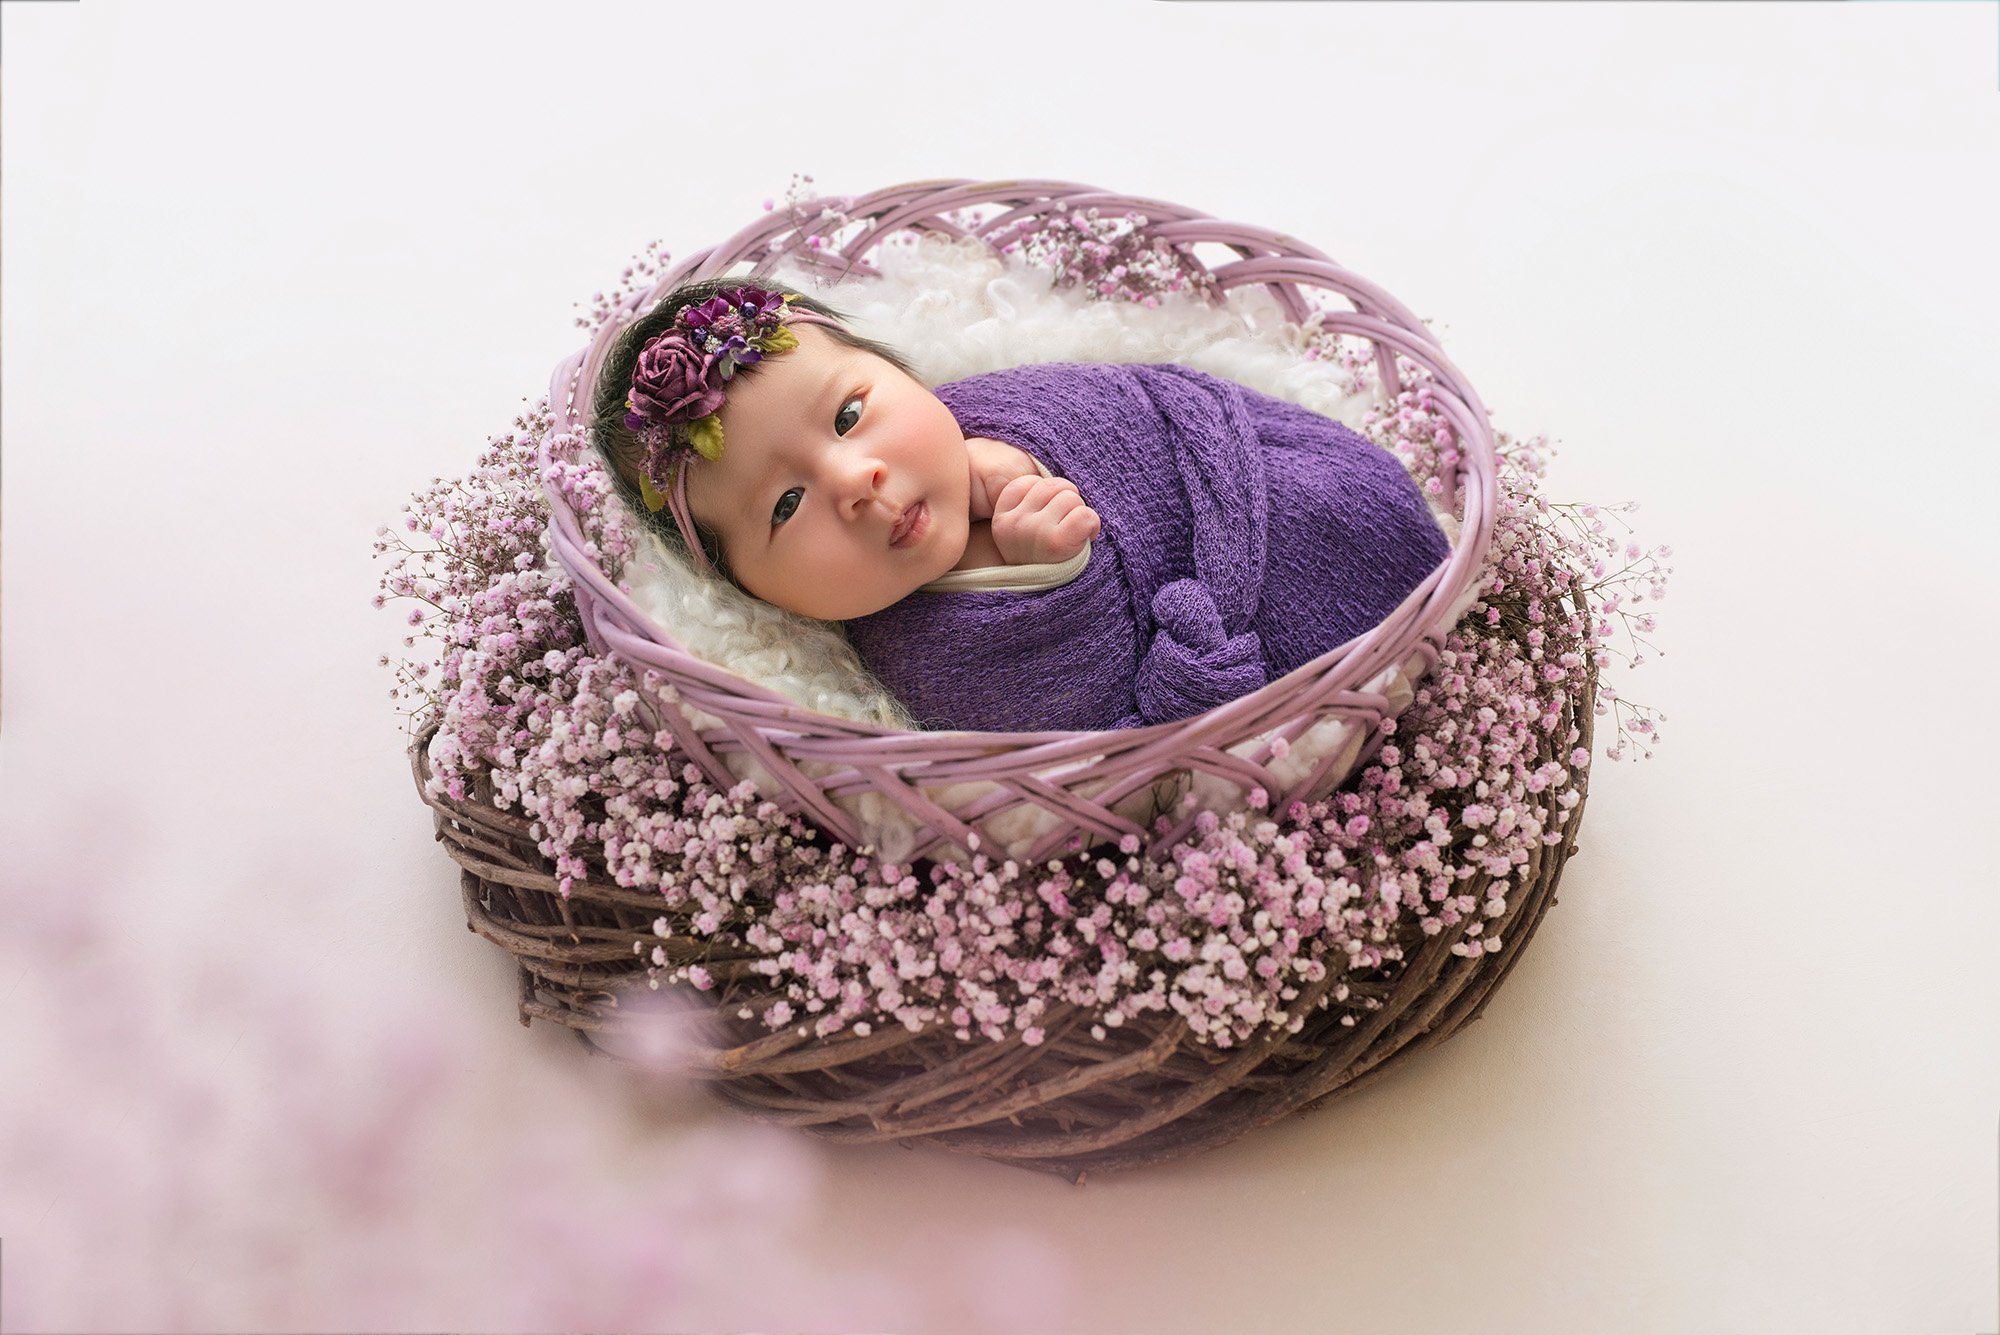 vibrant newborn photo month old baby girl swaddled in purple wrap in a lavender nest looking at the camera with eyes open best time to take newborn photos